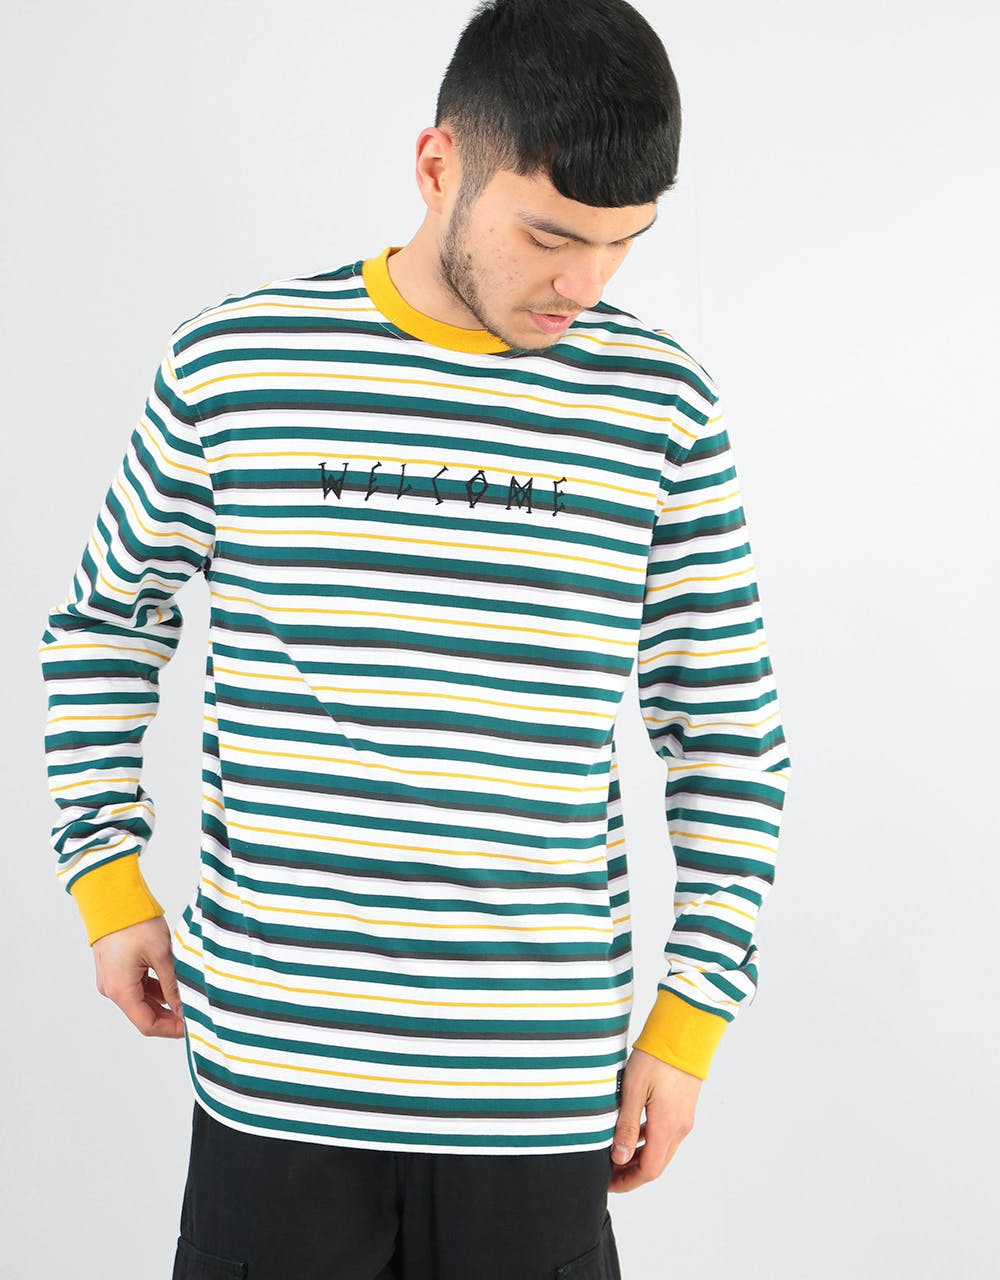 Welcome Surf Stripe Yarn-Dyed L/S Knit T-Shirt - Gold/Teal/White